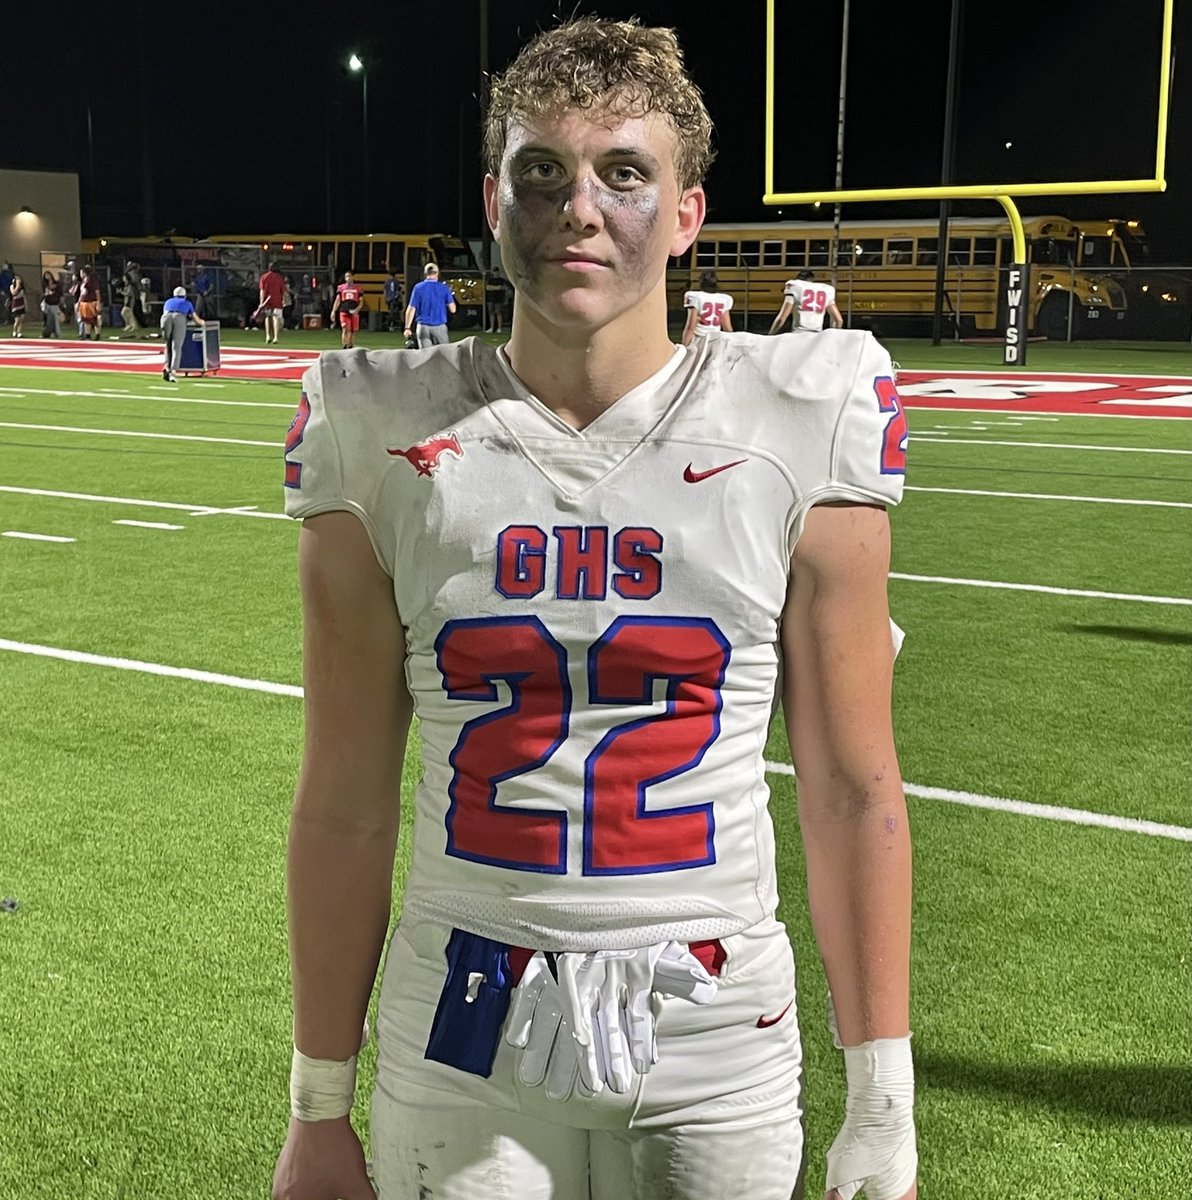 Rondale Carridine made a huge season debut for Grapevine tonight but we can’t forget TE @BradyWags22 who also made his debut. 6-3, 230 First team all district 2022. Threw some key blocks. 11 offers on his 247 including a few Ivy League & Military academies #txhsfb #uncommitted